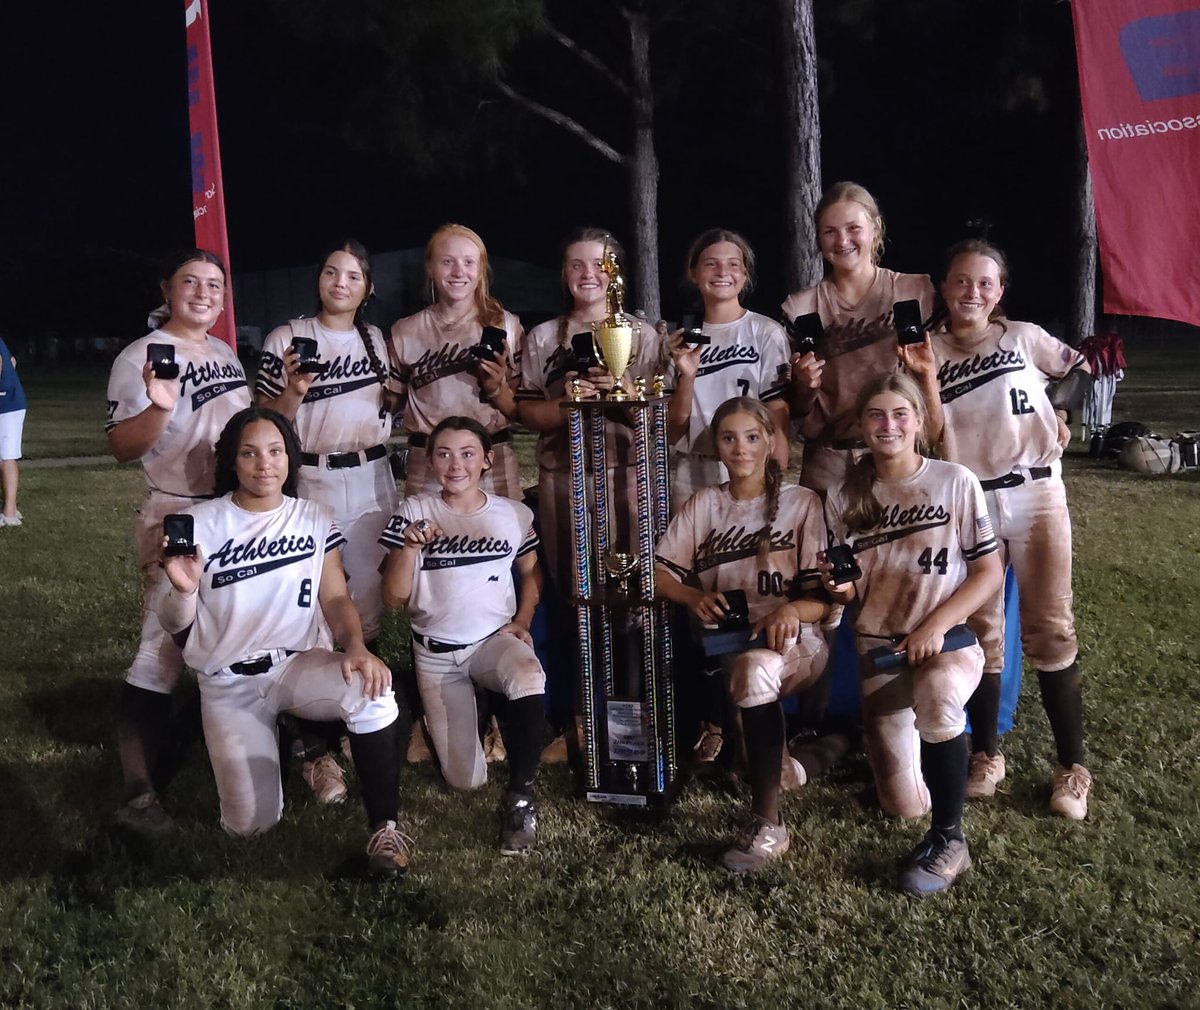 Your Southern 16A Nationals Finalist/Runner Up. Beating the team who won, to send it to the 'IF' Game. For a 1st year 14a team playing up in a 16a tourney Nationals Tourney? Really Proud of these Ladies! @ExtraInningSB @SoCalAsOrg @CoachHodo @sam_not_yabro @camsoftball5